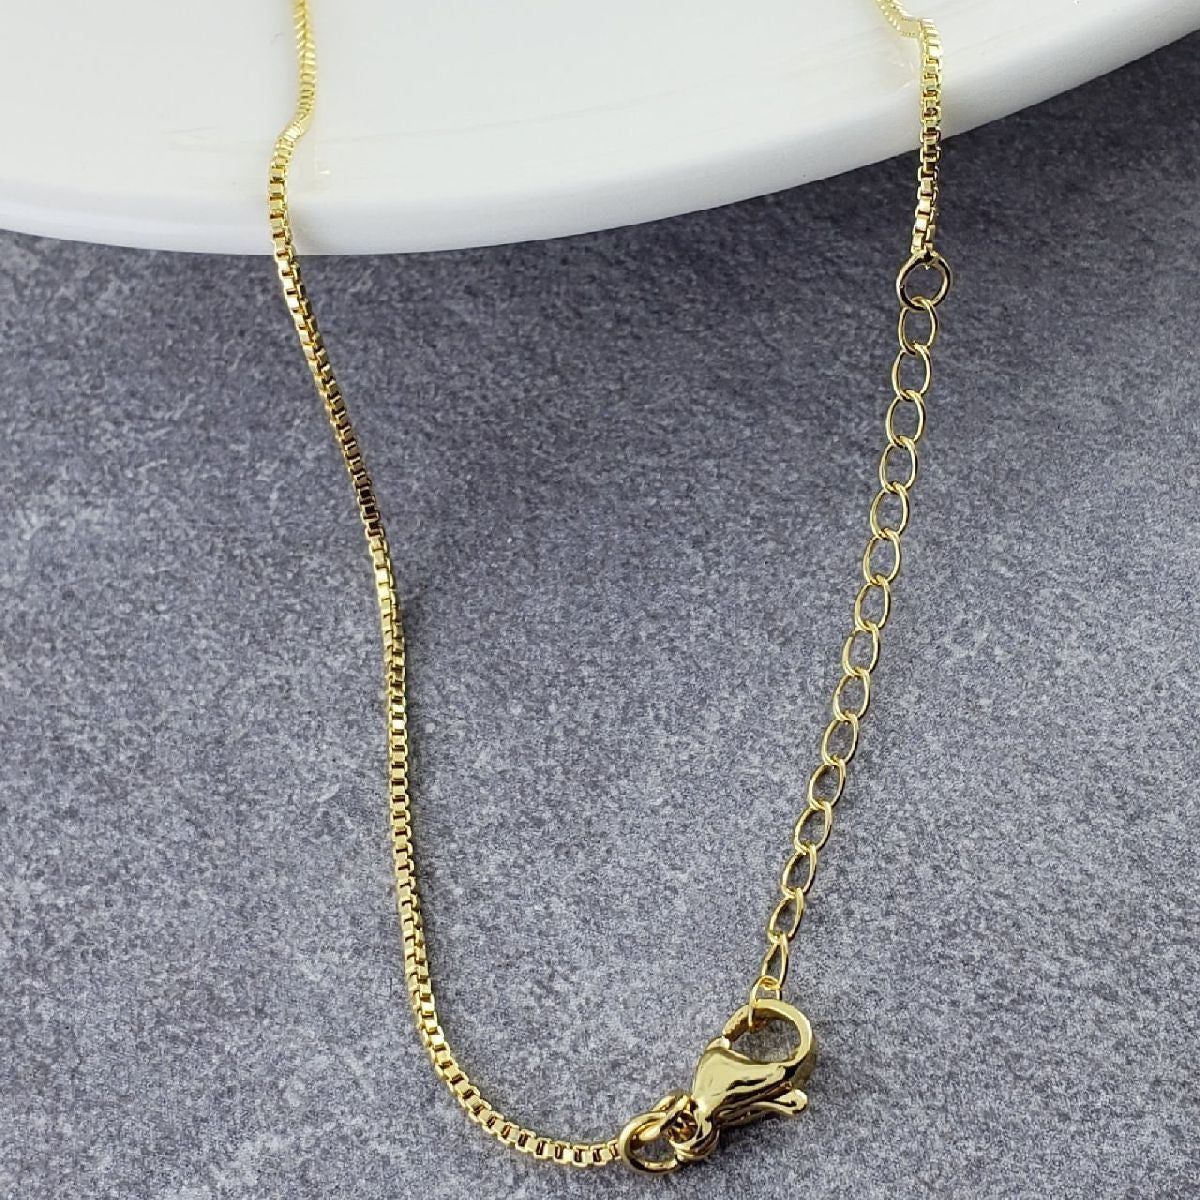 Dascusto Personalized 3D 18K Gold Plated Double Diamond Personalised Pendant  Necklace With Nameplate And Two Tone Chain For Women 230710 From Xue08,  $14.45 | DHgate.Com